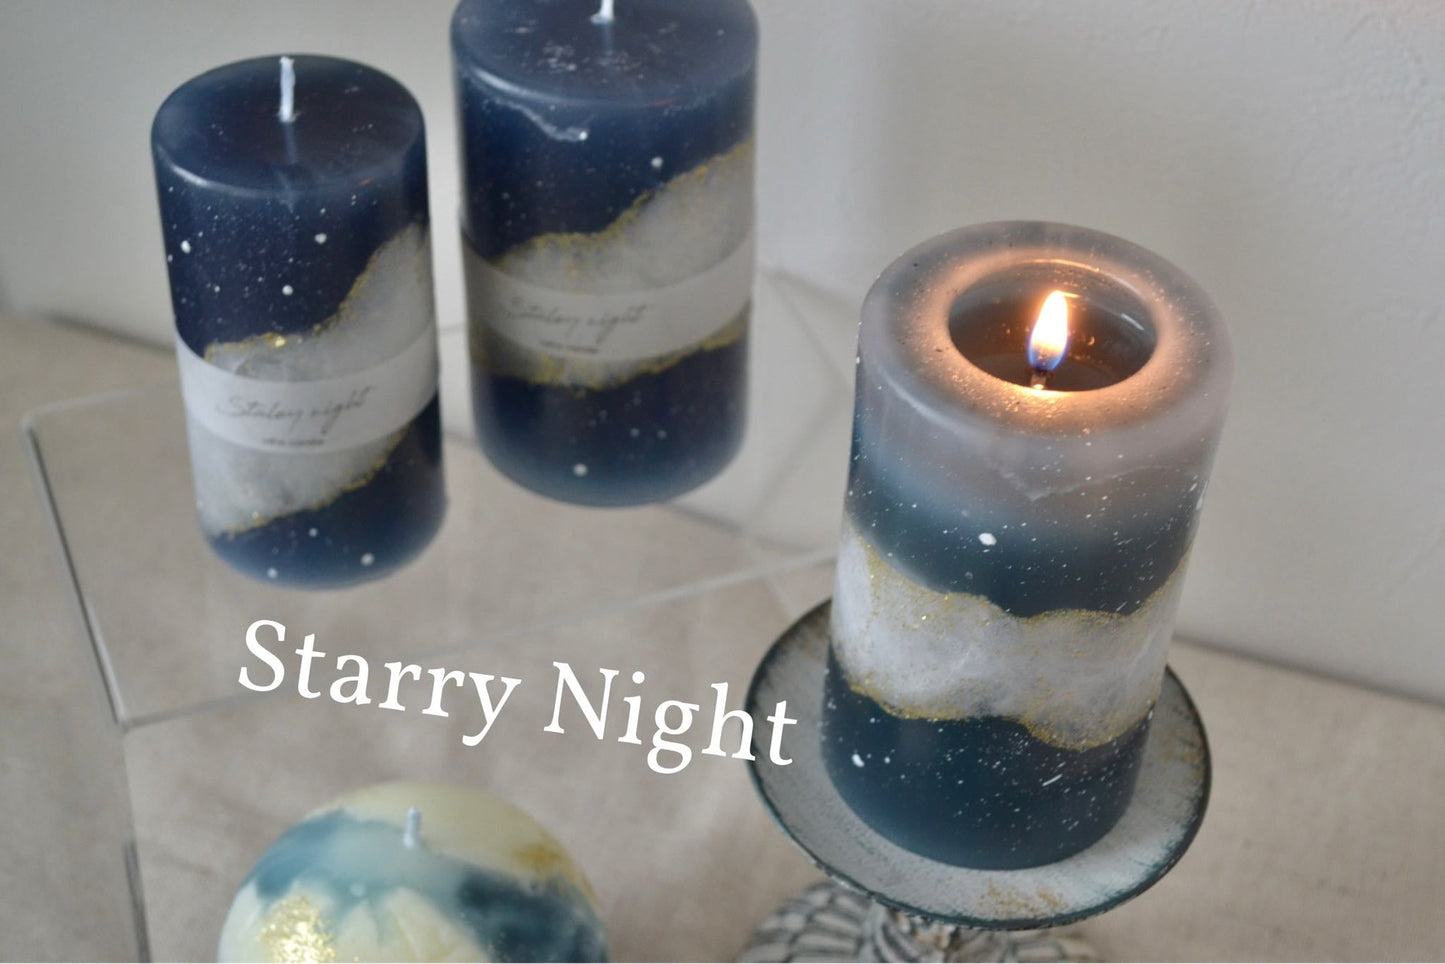 Starry night candle